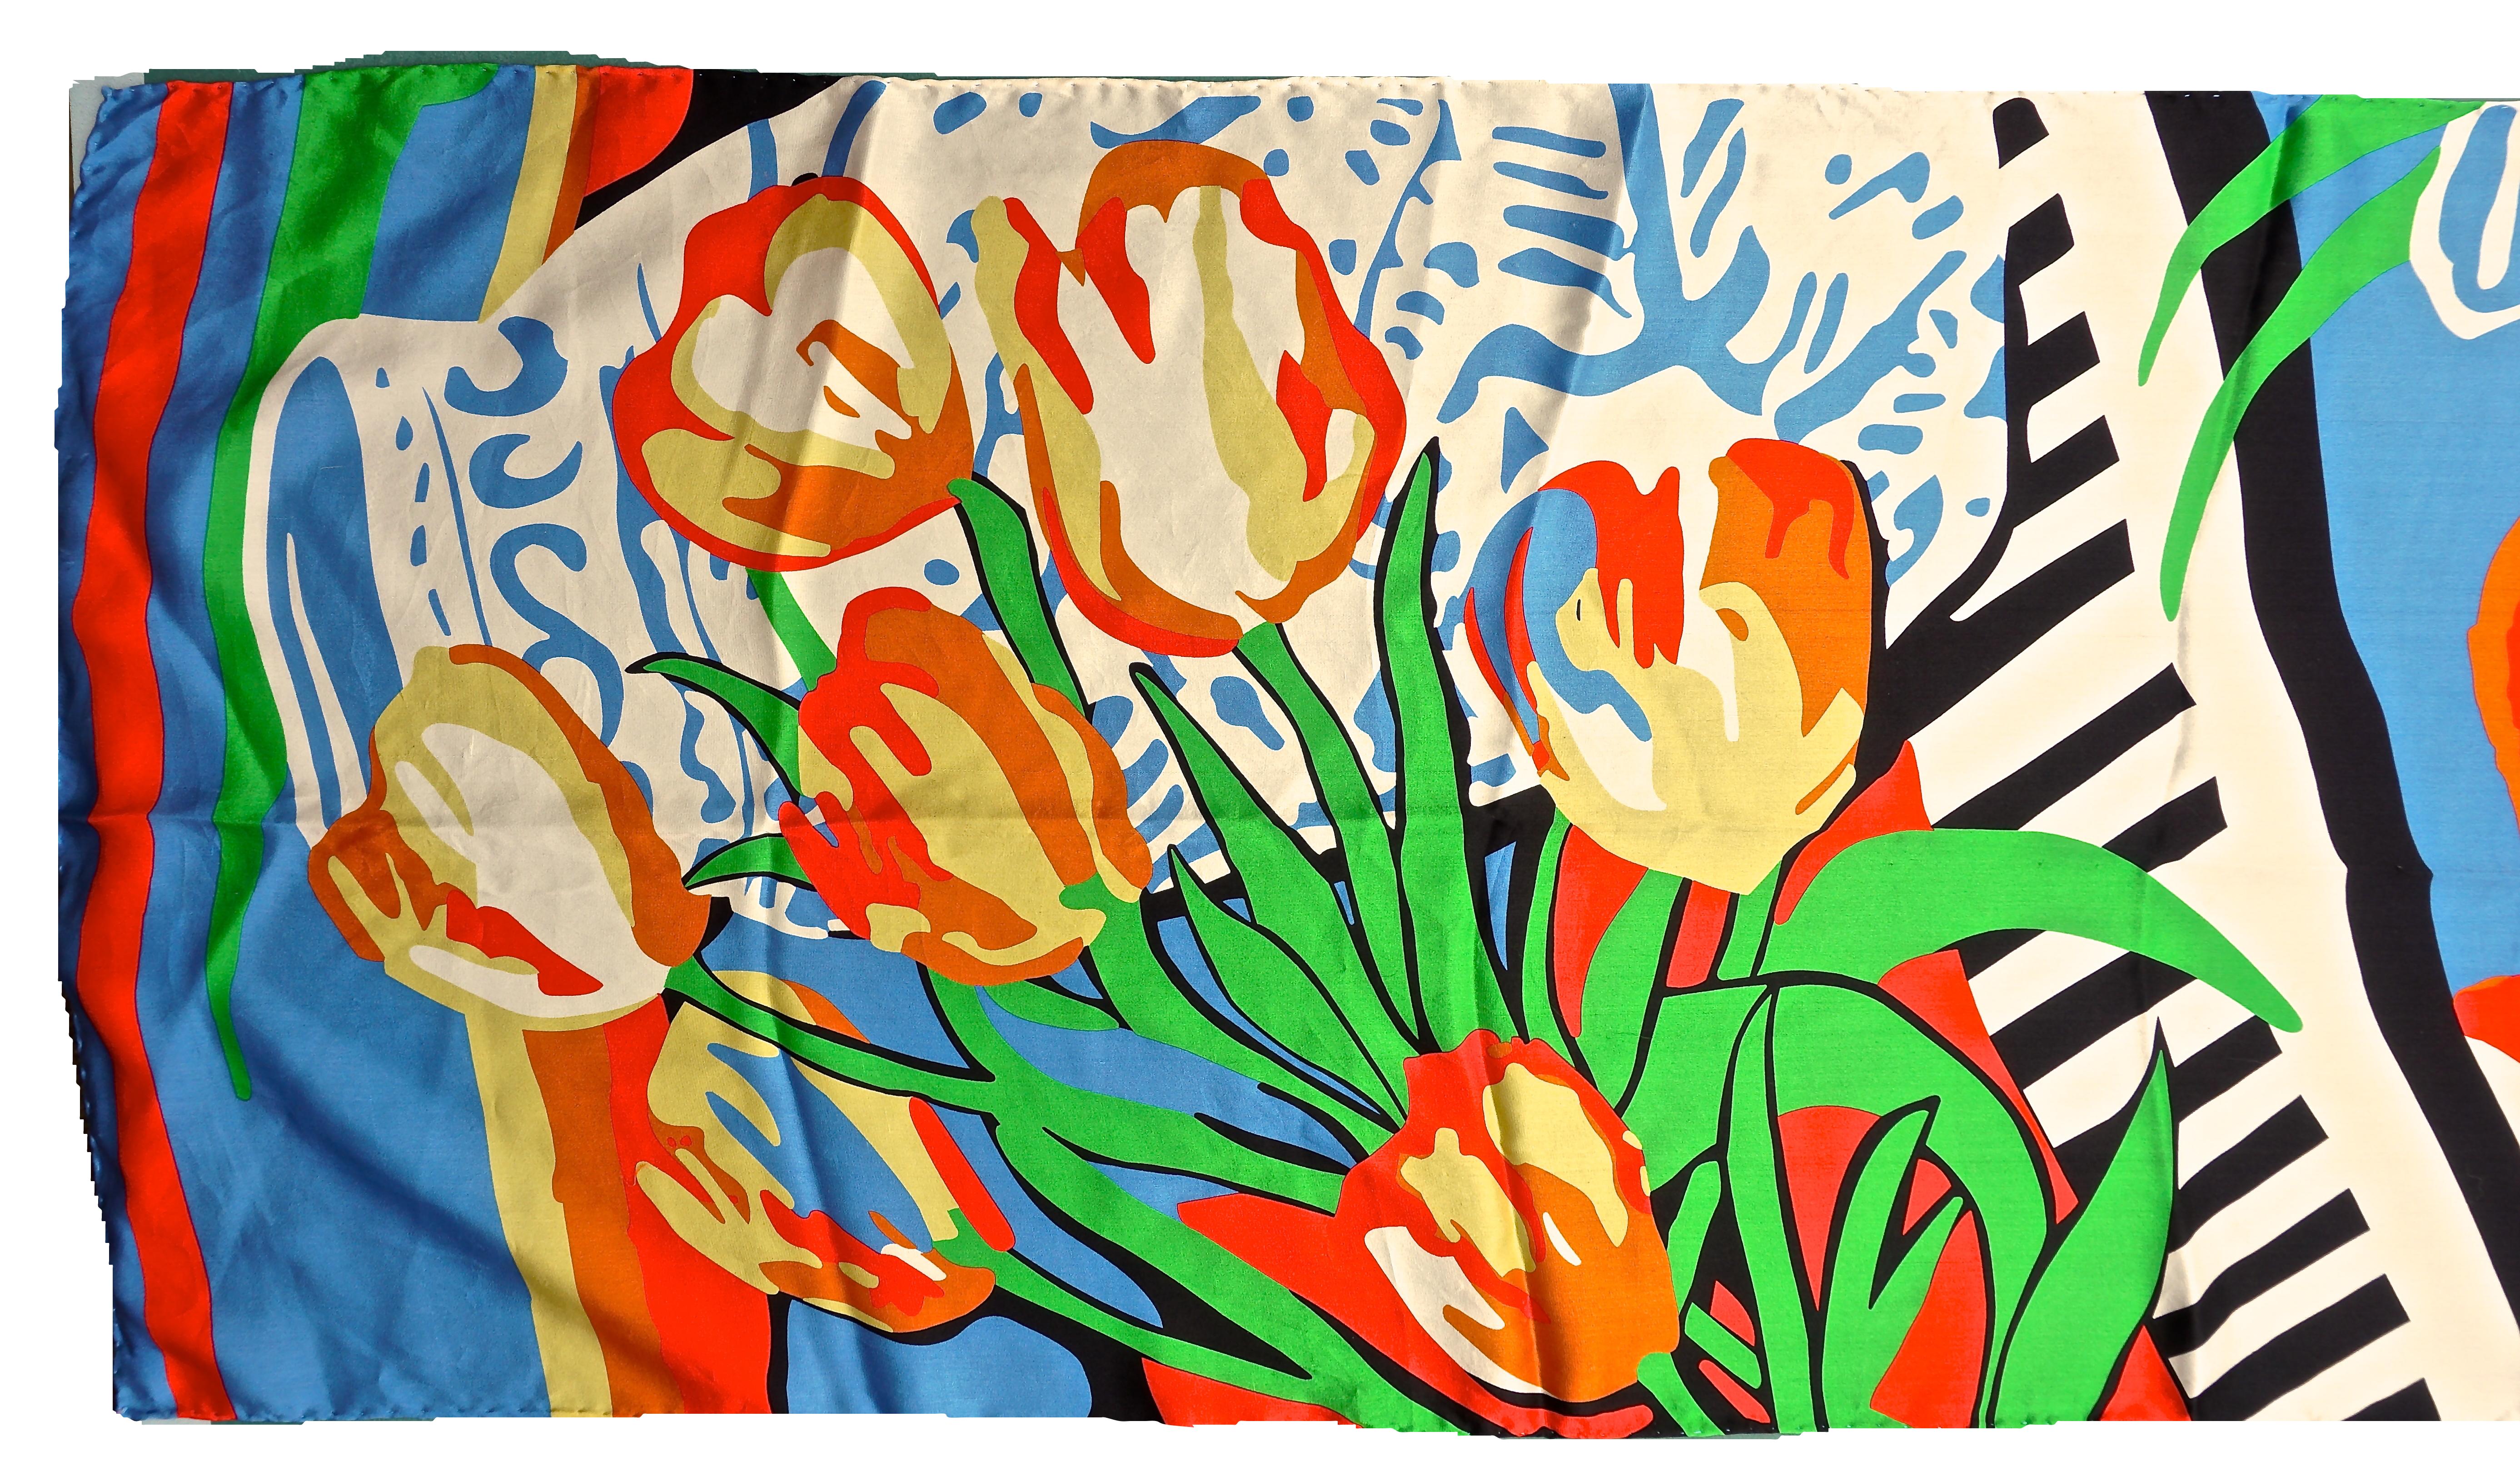 Long silk scarf, featuring a lovely brightly coloured abstract tulip flower and vase print. The scarf has hand rolled edges. Measuring approximately length 152.4cm / 60 inches by width 39.37cm / 15.5 inches. The scarf is in very good condition, with